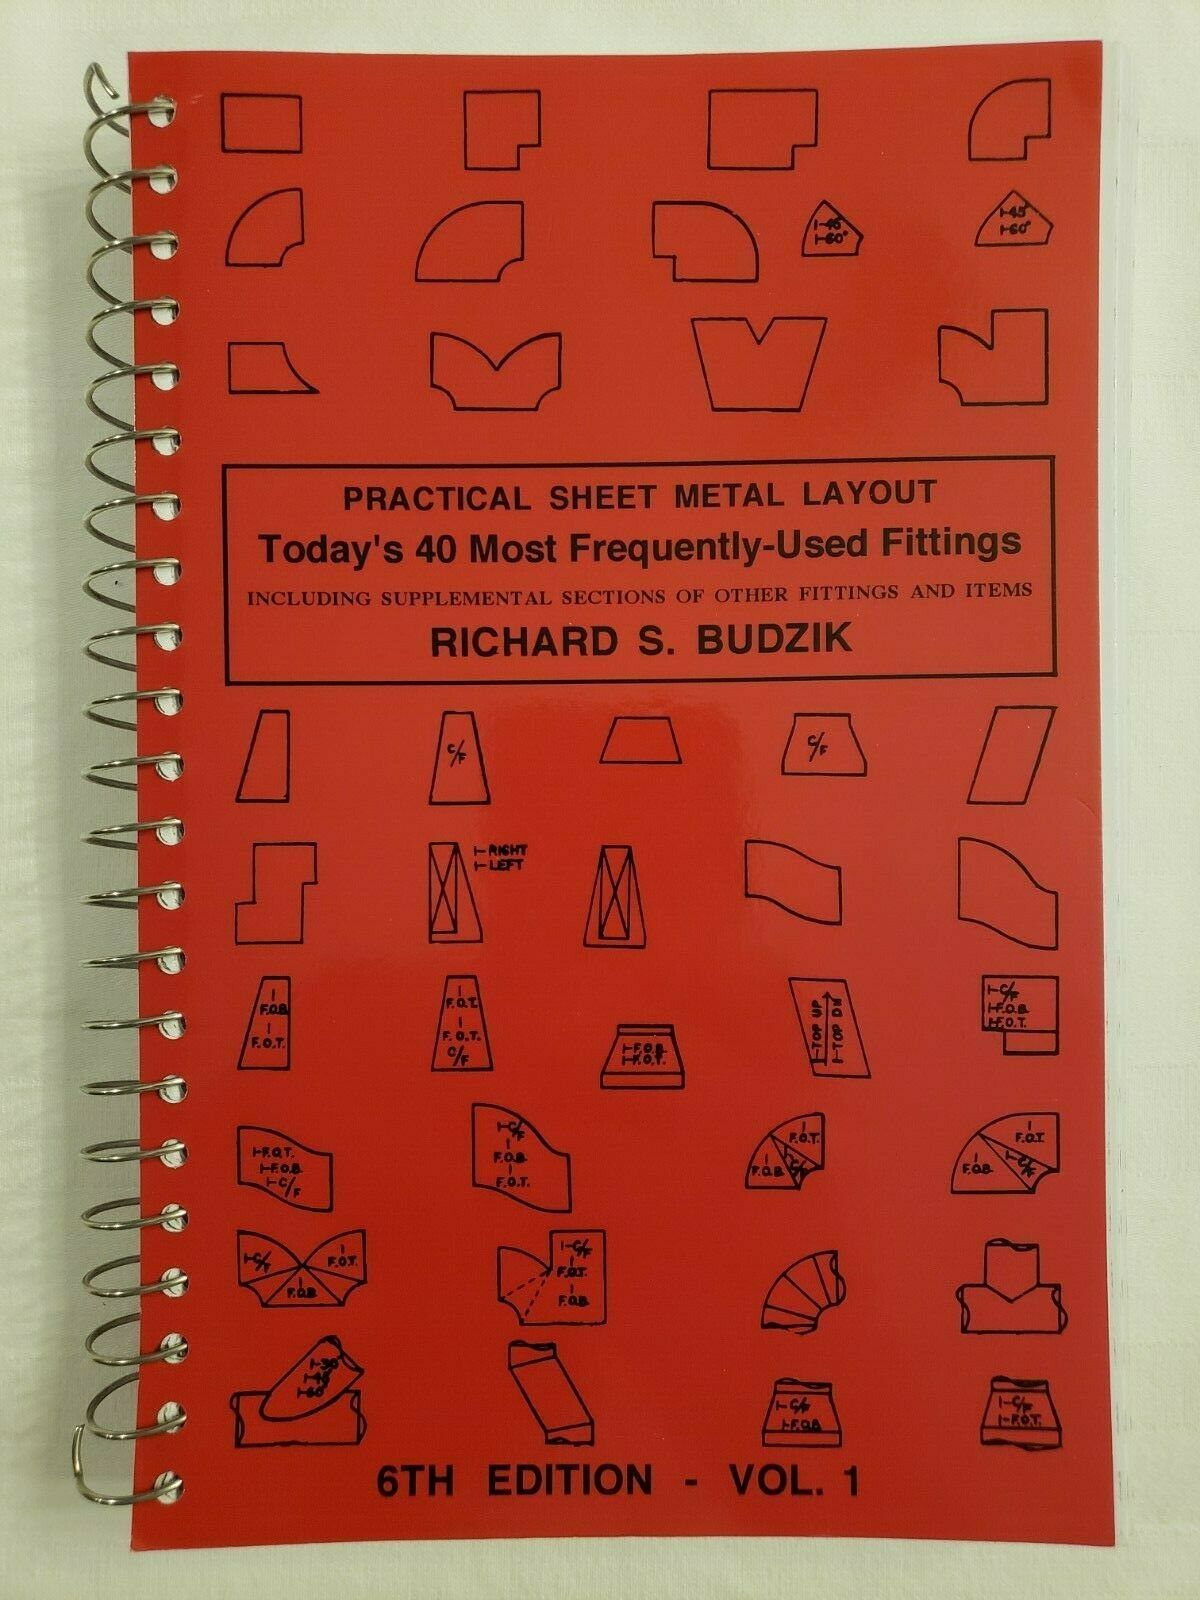 Practical Sheet Metal Layout Series: Today's 40 Most Frequently Used Fittings Including Supplemental Sections of Other Fittings and Items 6th Edition Vol. 1 by Richard S. Budzik